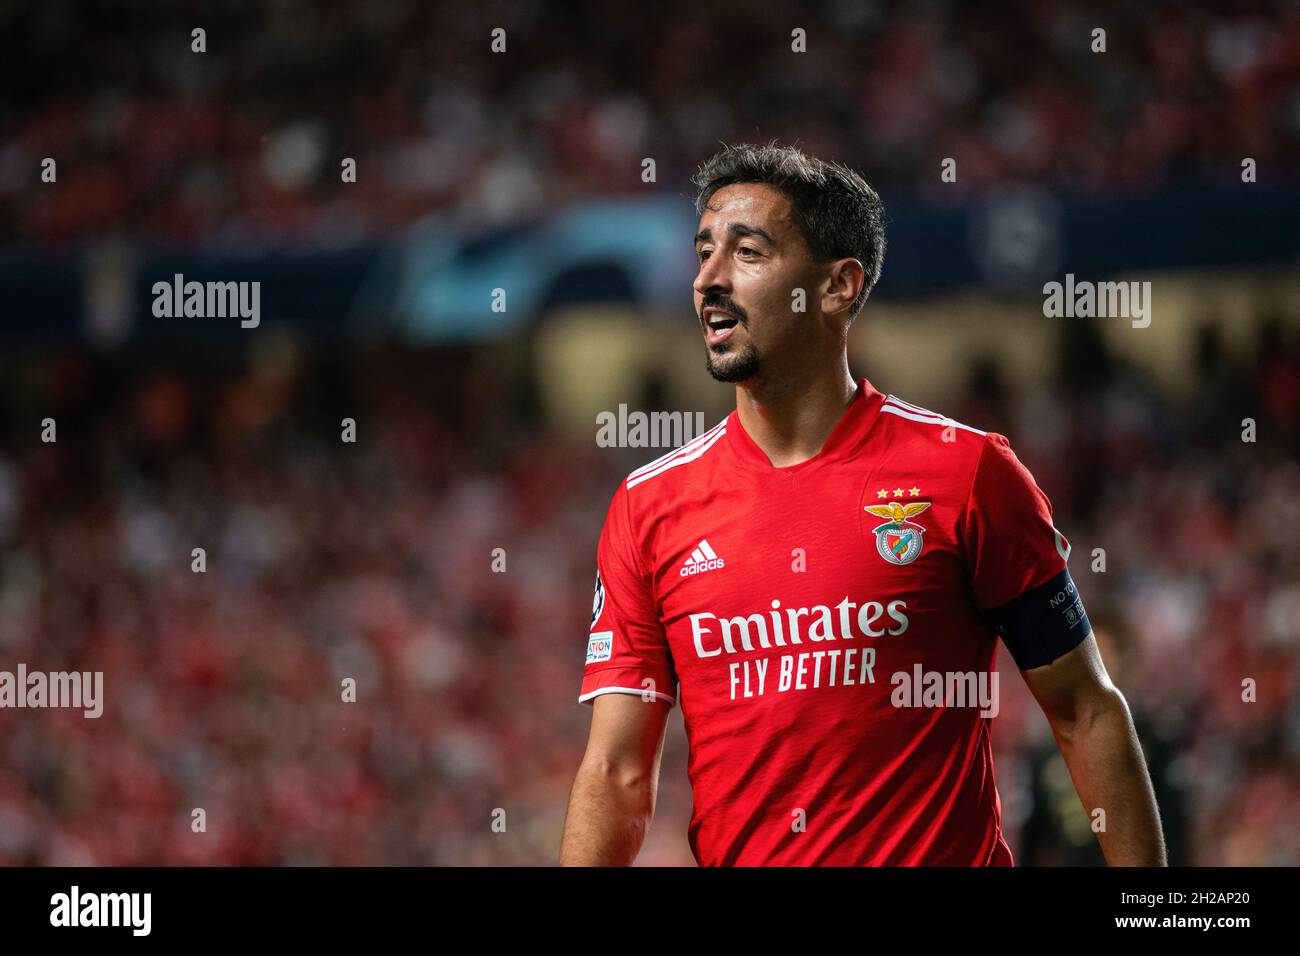 Lisbon, Portugal. 20th Oct, 2021. Andre Almeida of SL Benfica seen during the UEFA Champions League match between SL Benfica and FC Bayern Munich at Estadio da Luz stadium. Final score; SL Benfica 0:4 FC Bayern Munich. (Photo by Hugo Amaral/SOPA Images/Sipa USA) Credit: Sipa USA/Alamy Live News Stock Photo